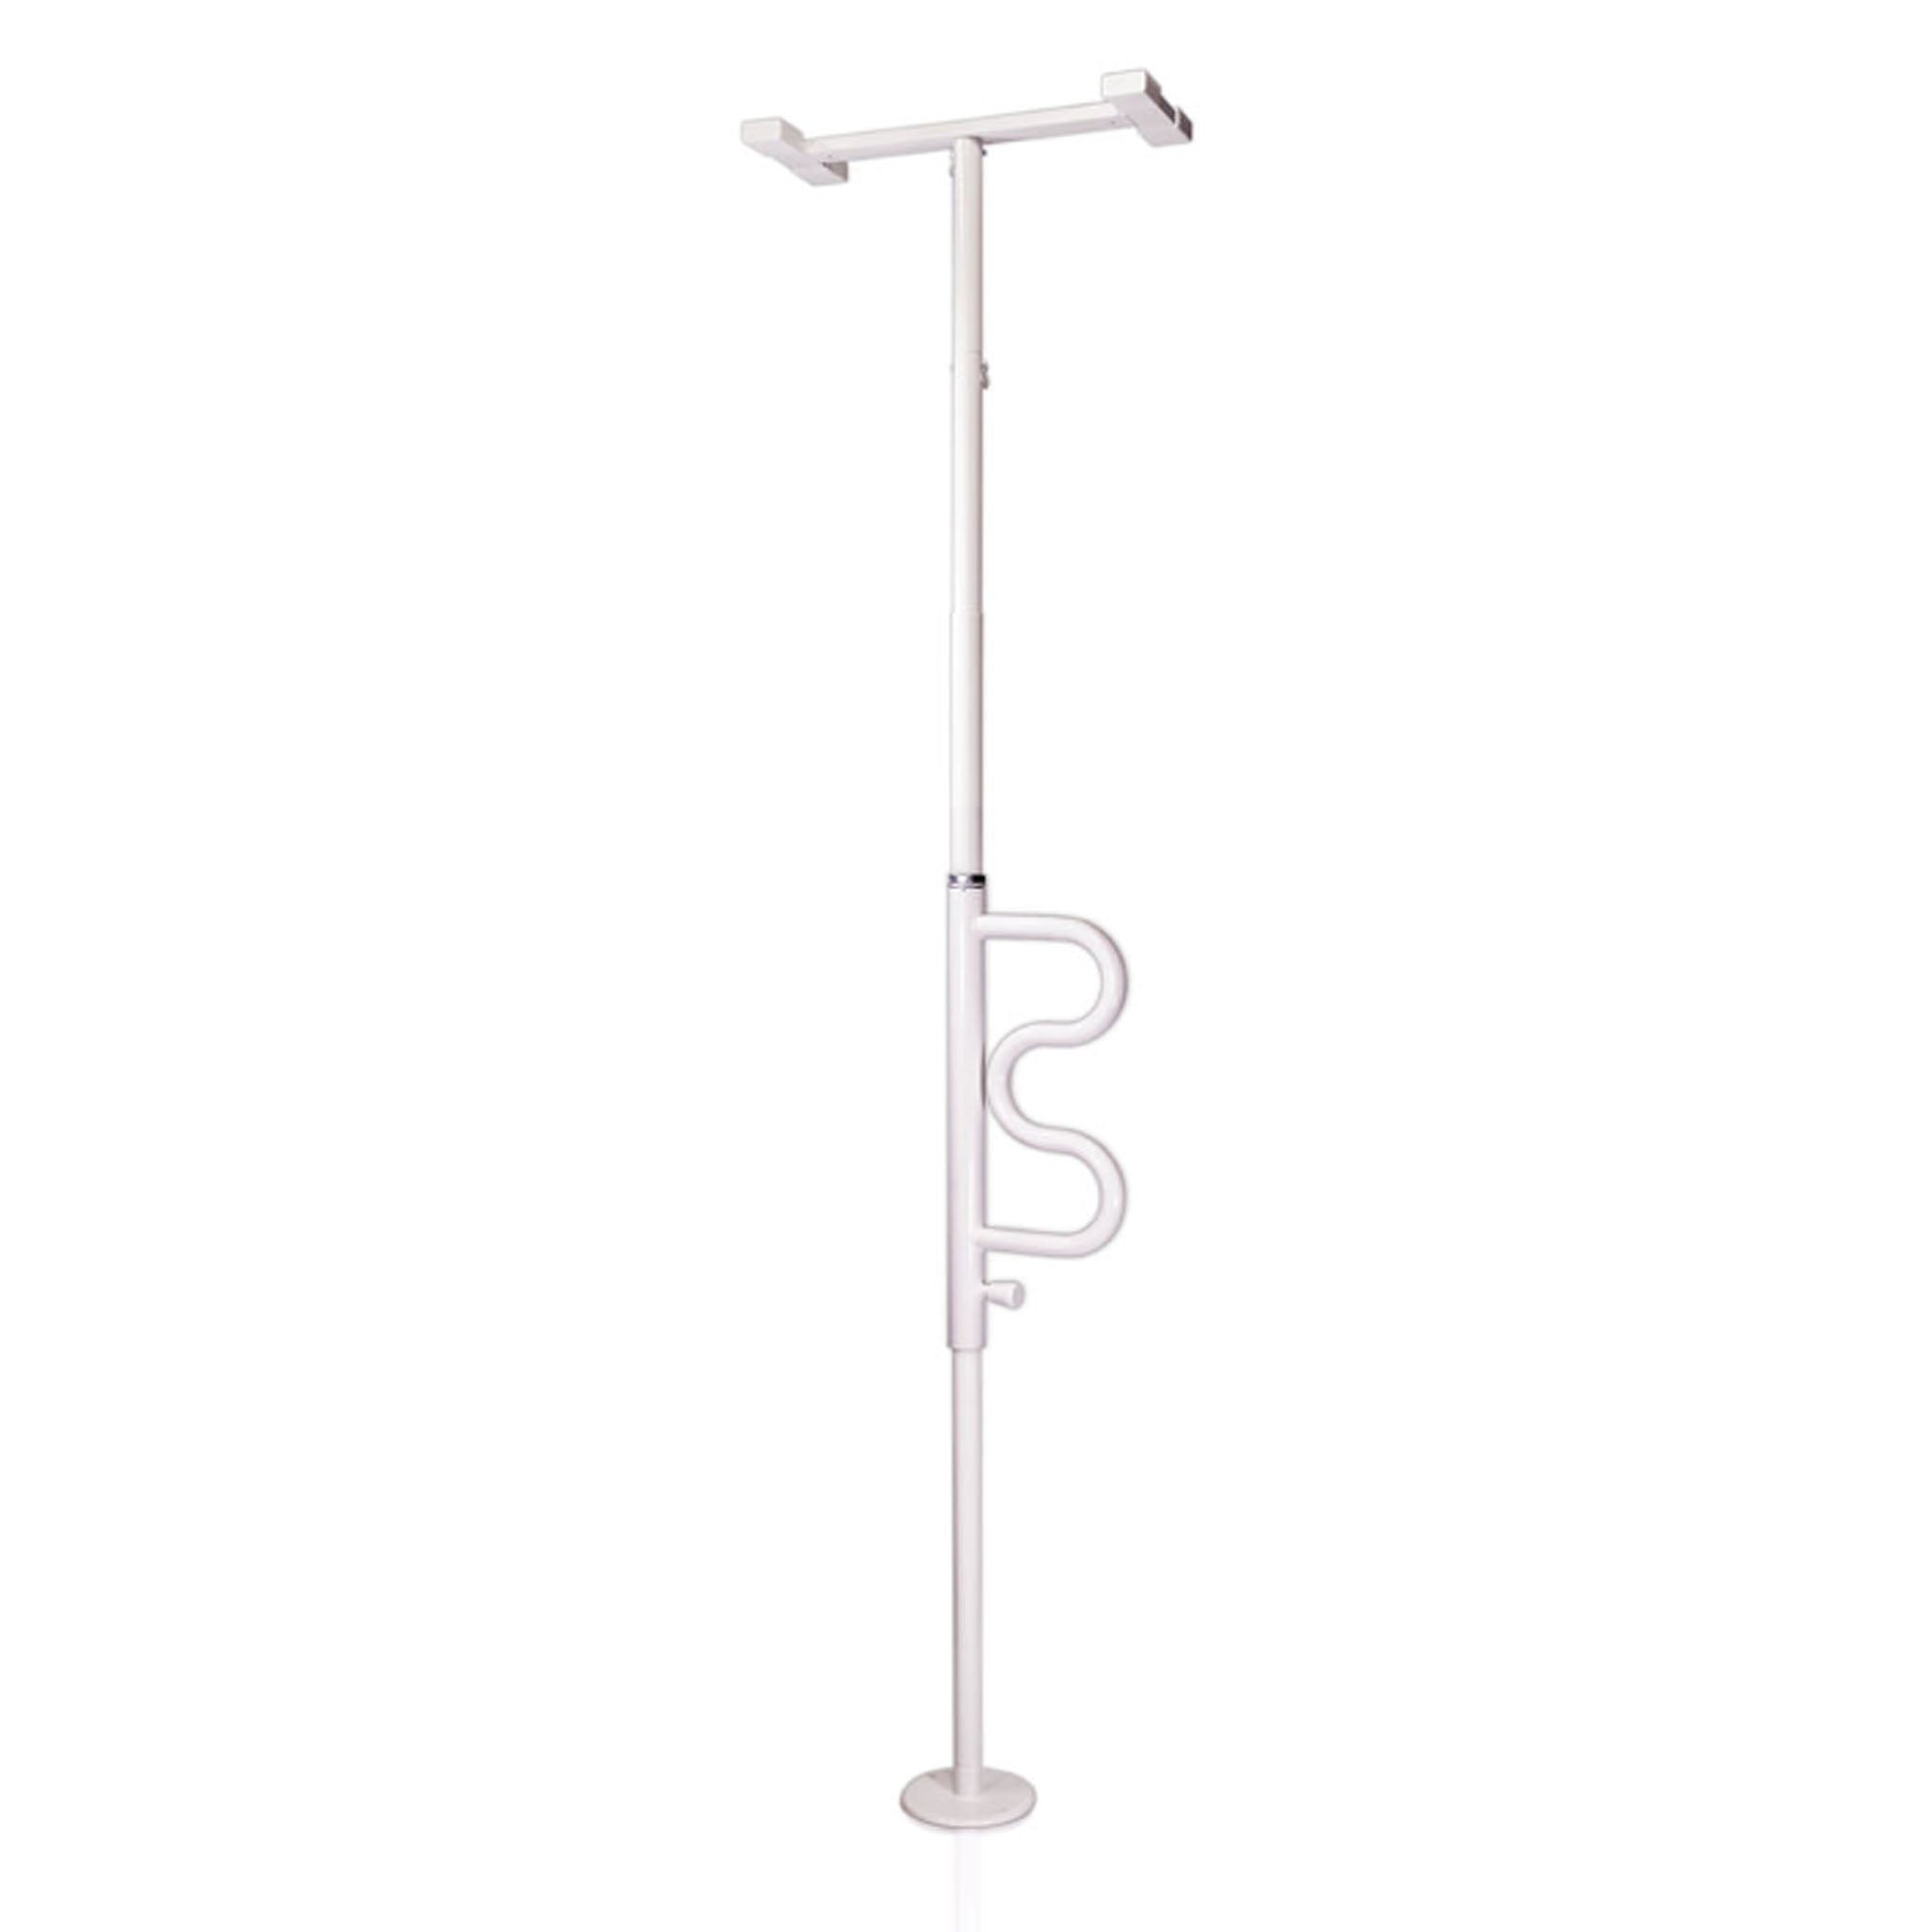 Security Pole & Curved Grab Bar by Stander